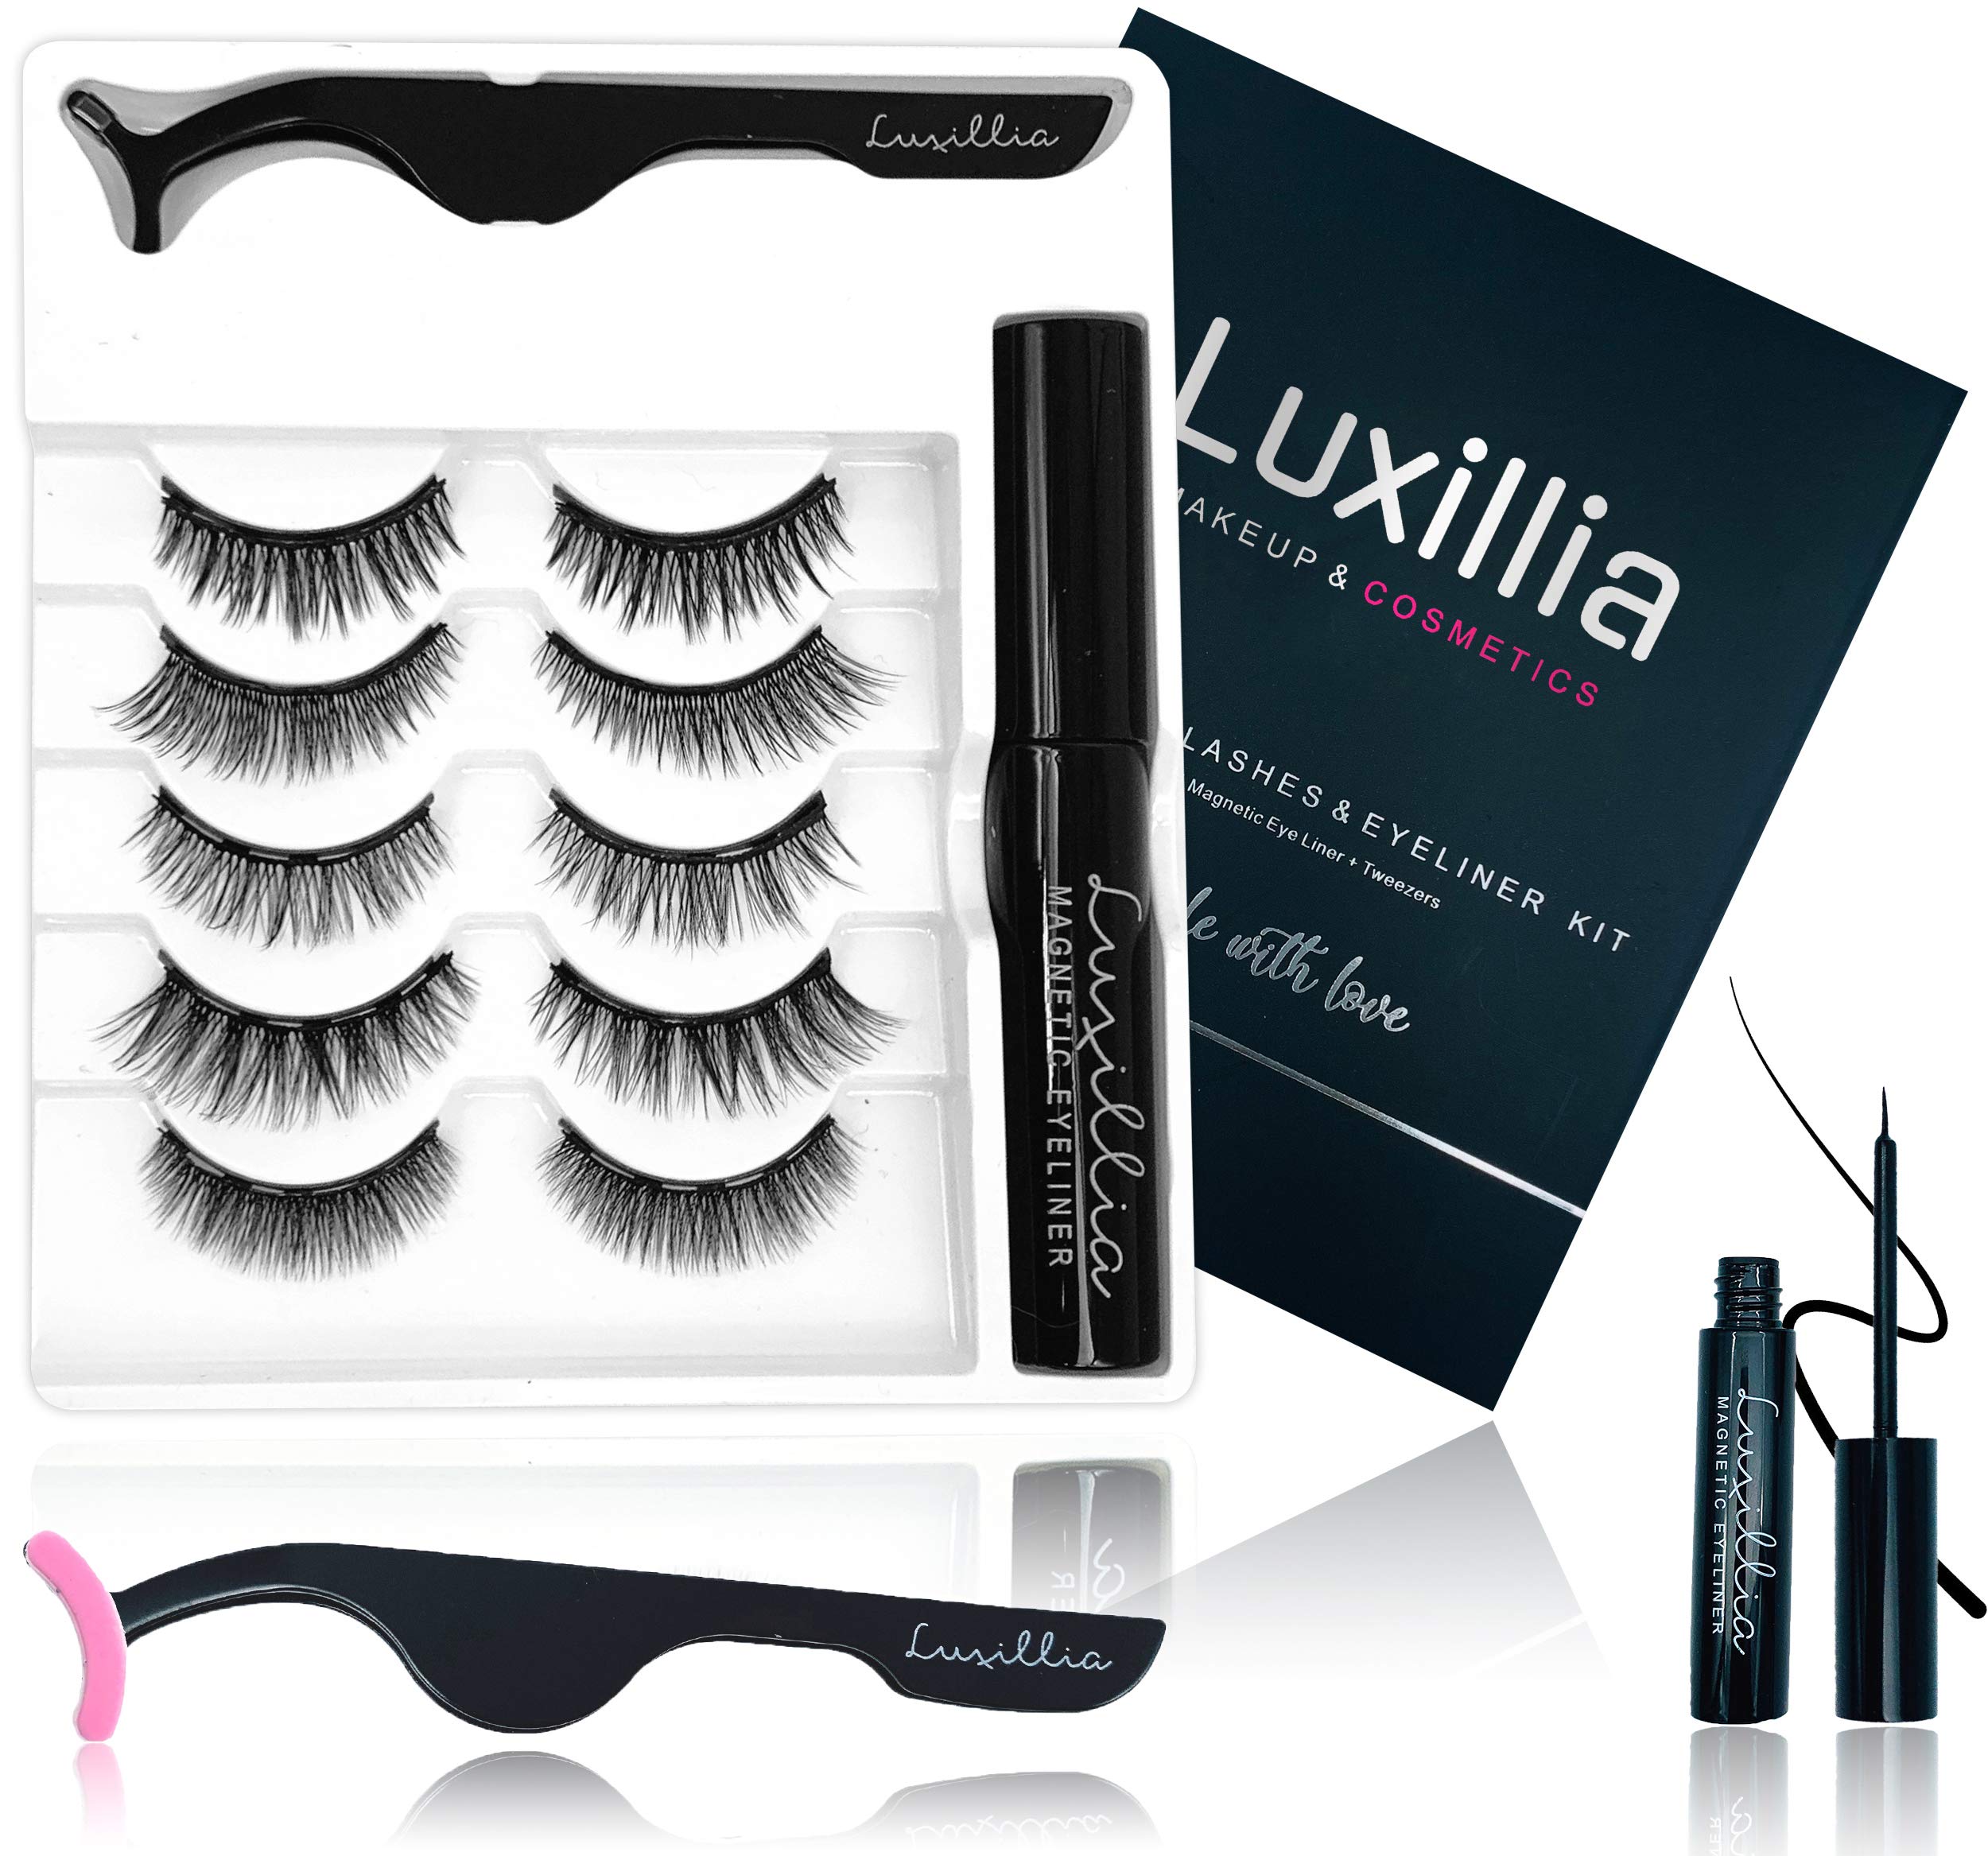 Luxillia Magnetic Eyelashes with Eyeliner, Most Natural Looking Magnetic Lashes Kit with Applicator, Best 8D, 3D Look, Reusable 